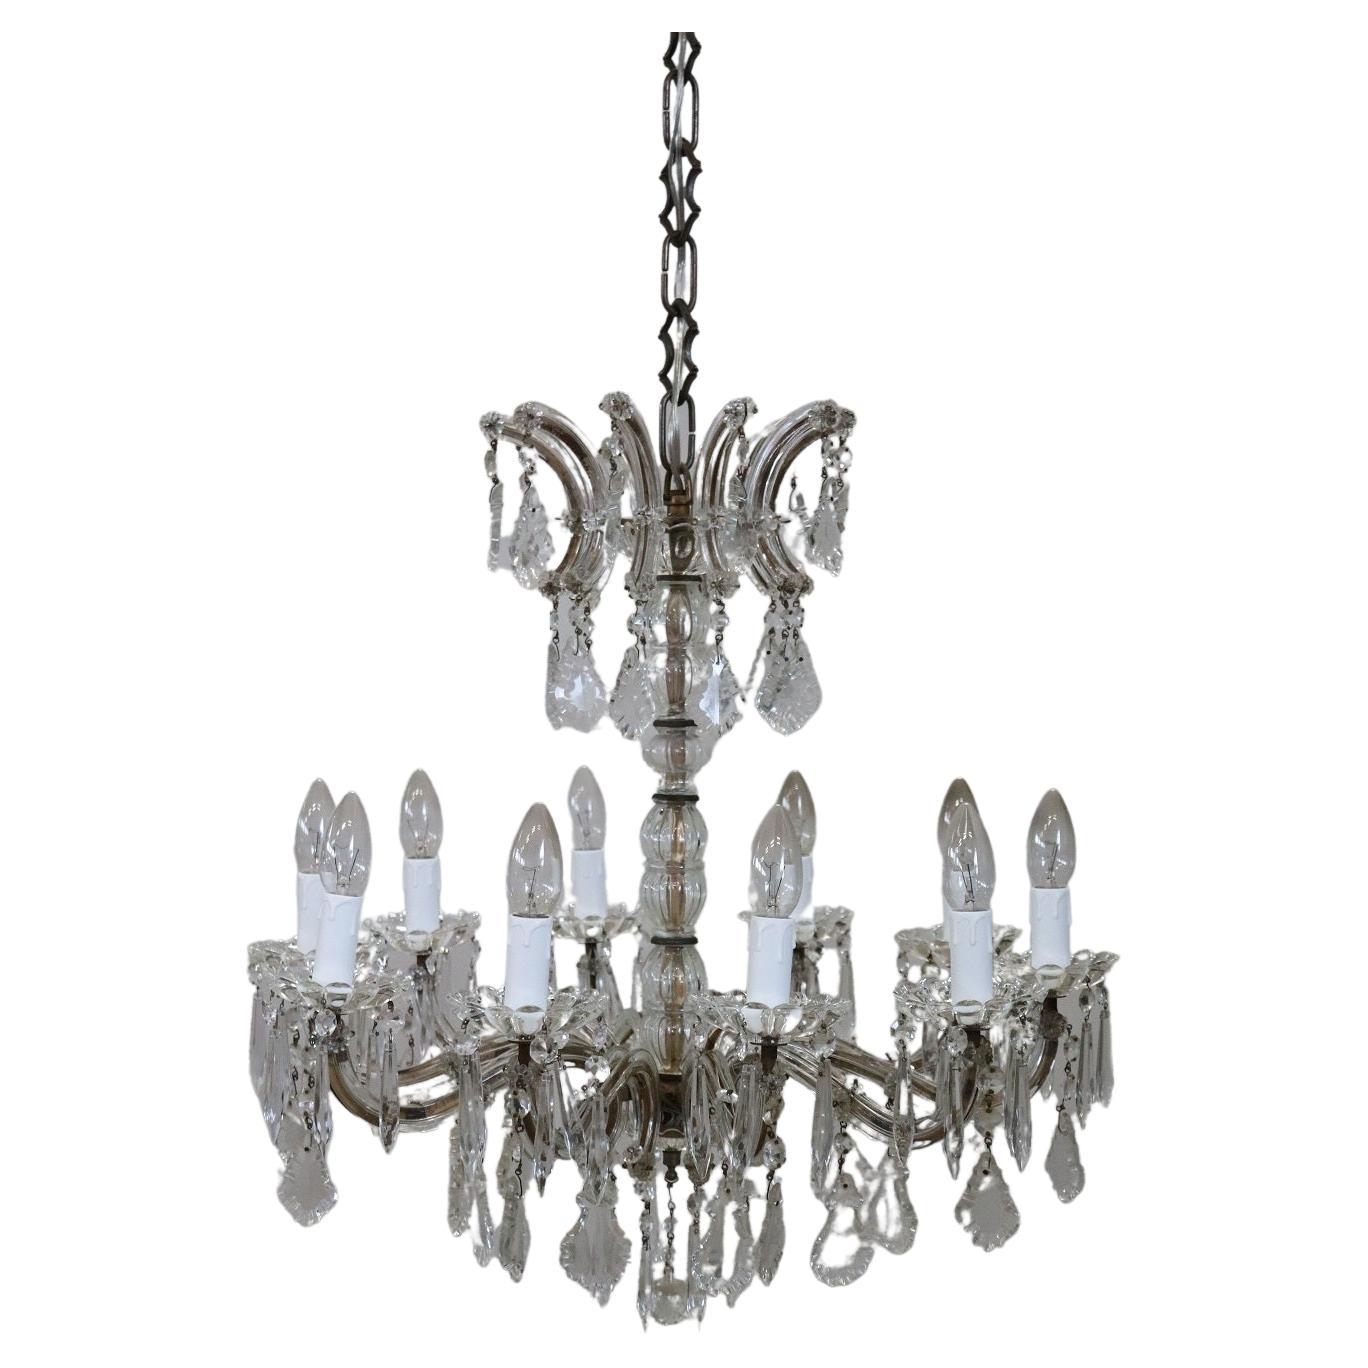 19th Century Italian Bronze and Crystals Antique Chandelier